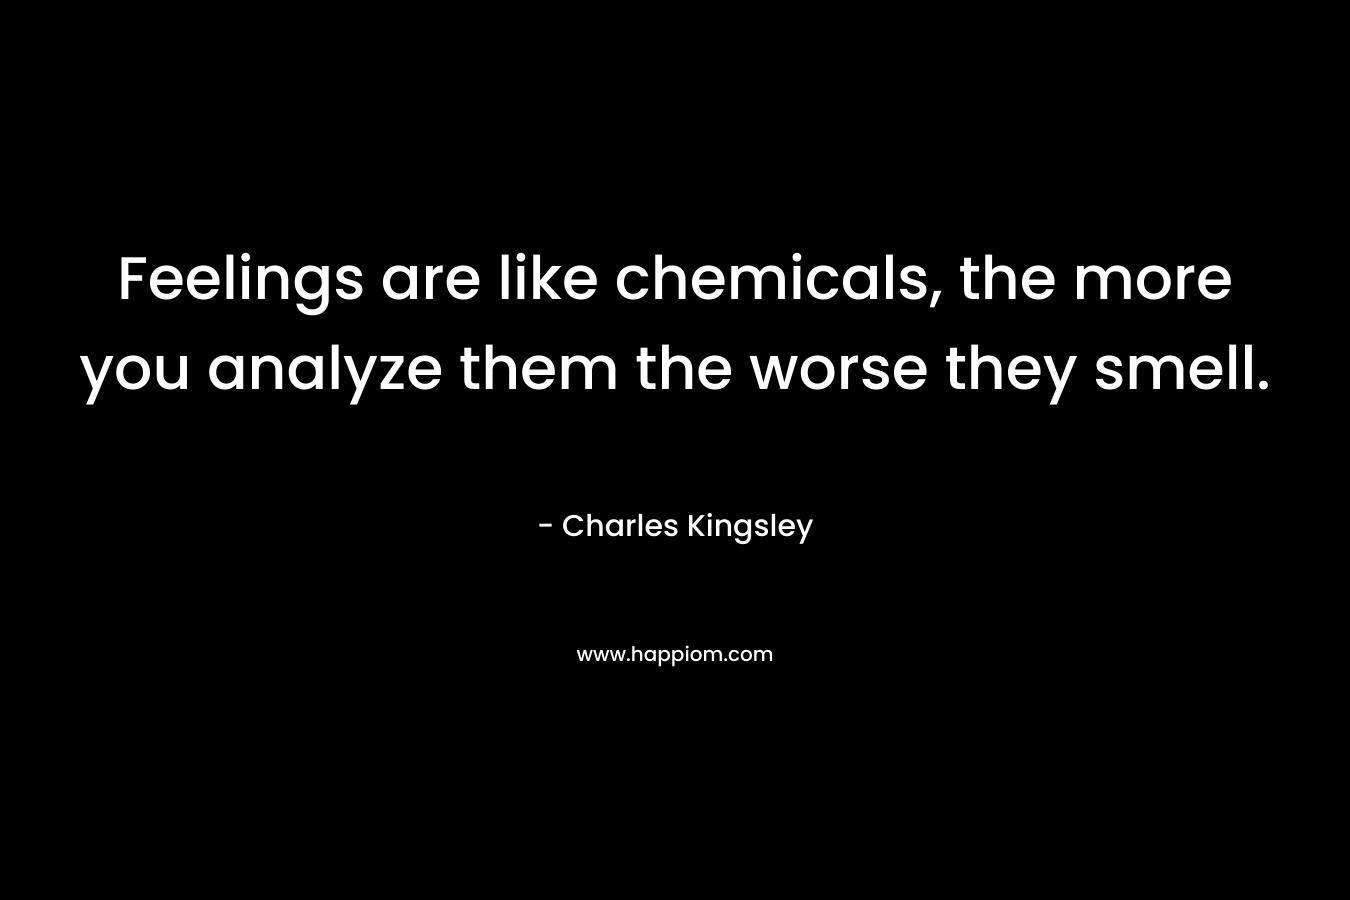 Feelings are like chemicals, the more you analyze them the worse they smell. – Charles Kingsley